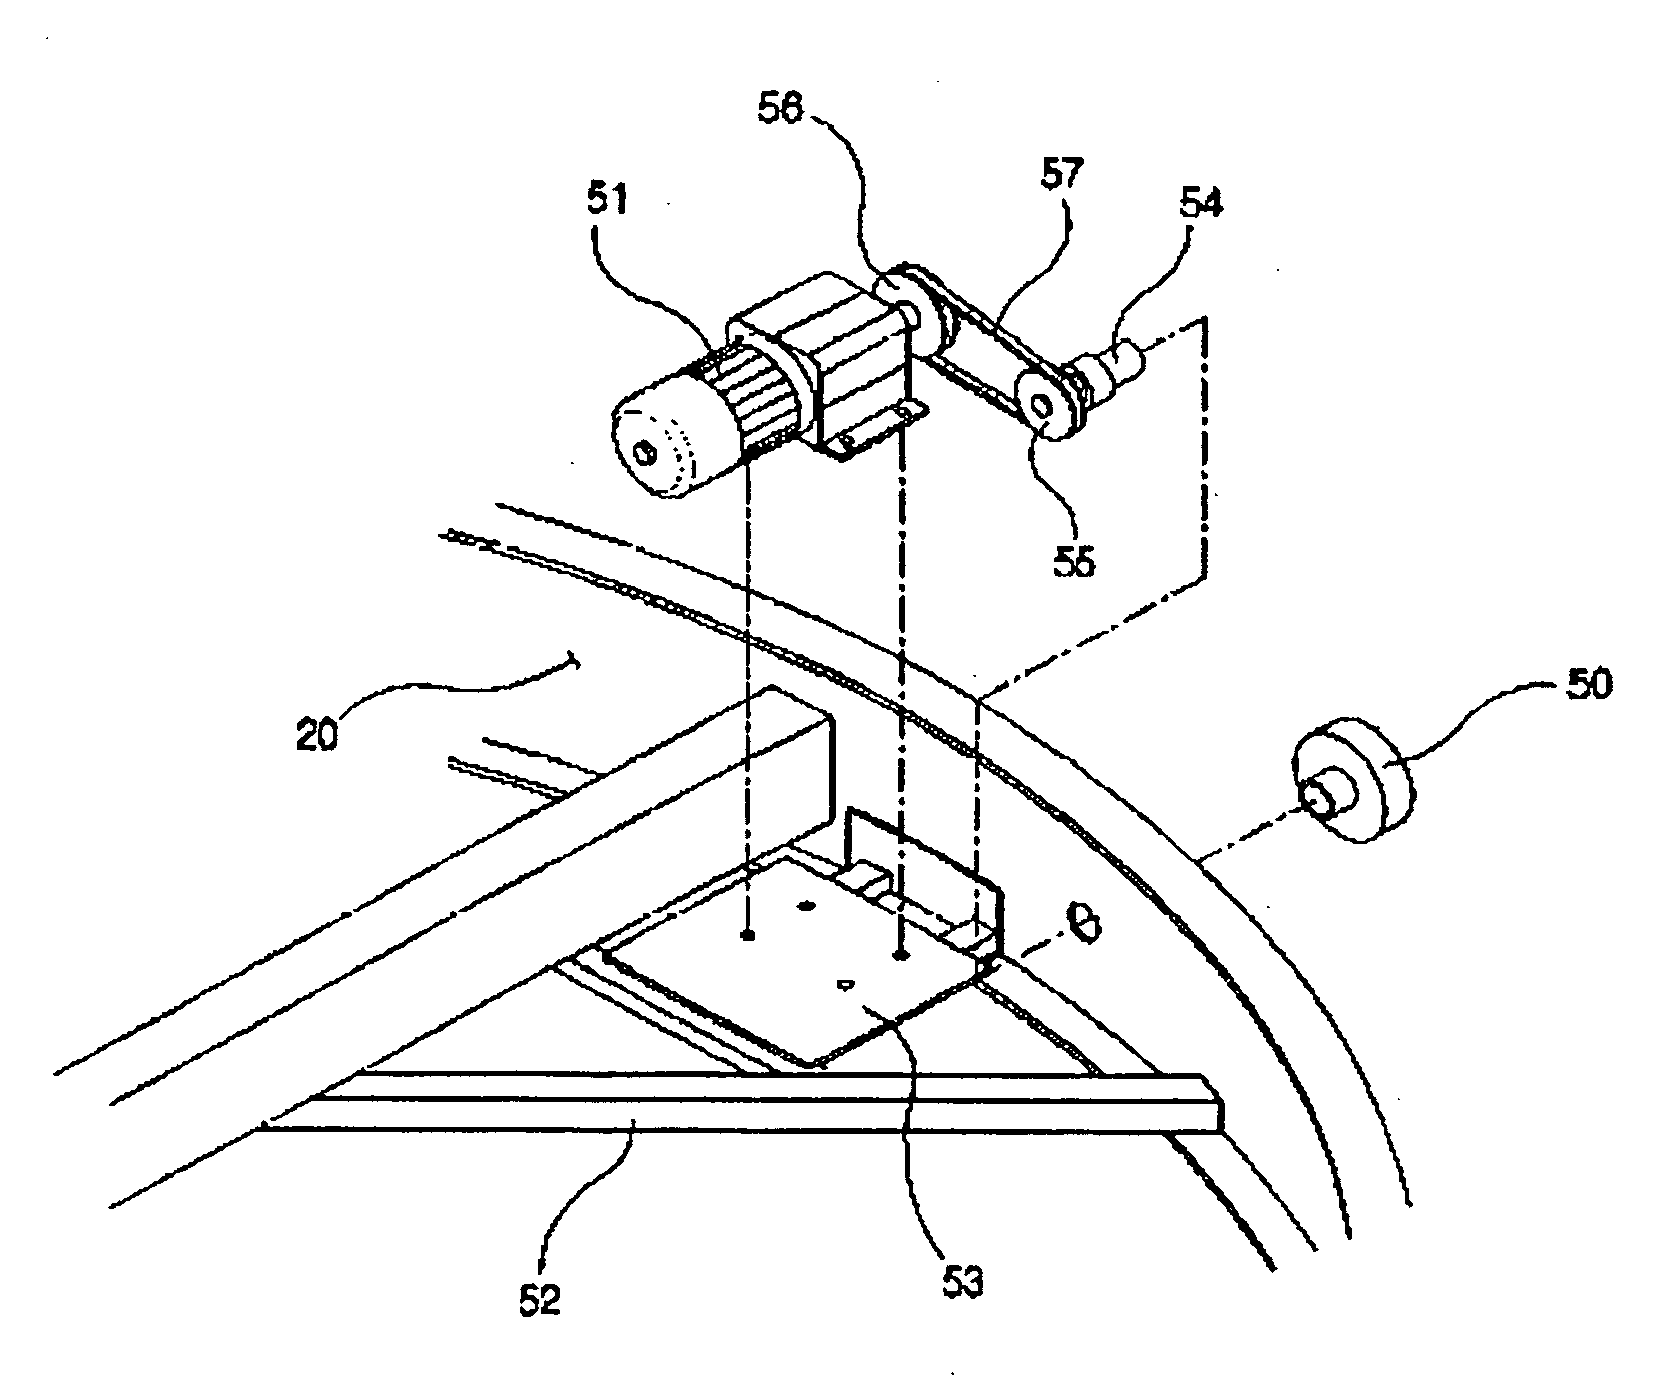 Power transmitting system for rotary wings of automatic revolving door